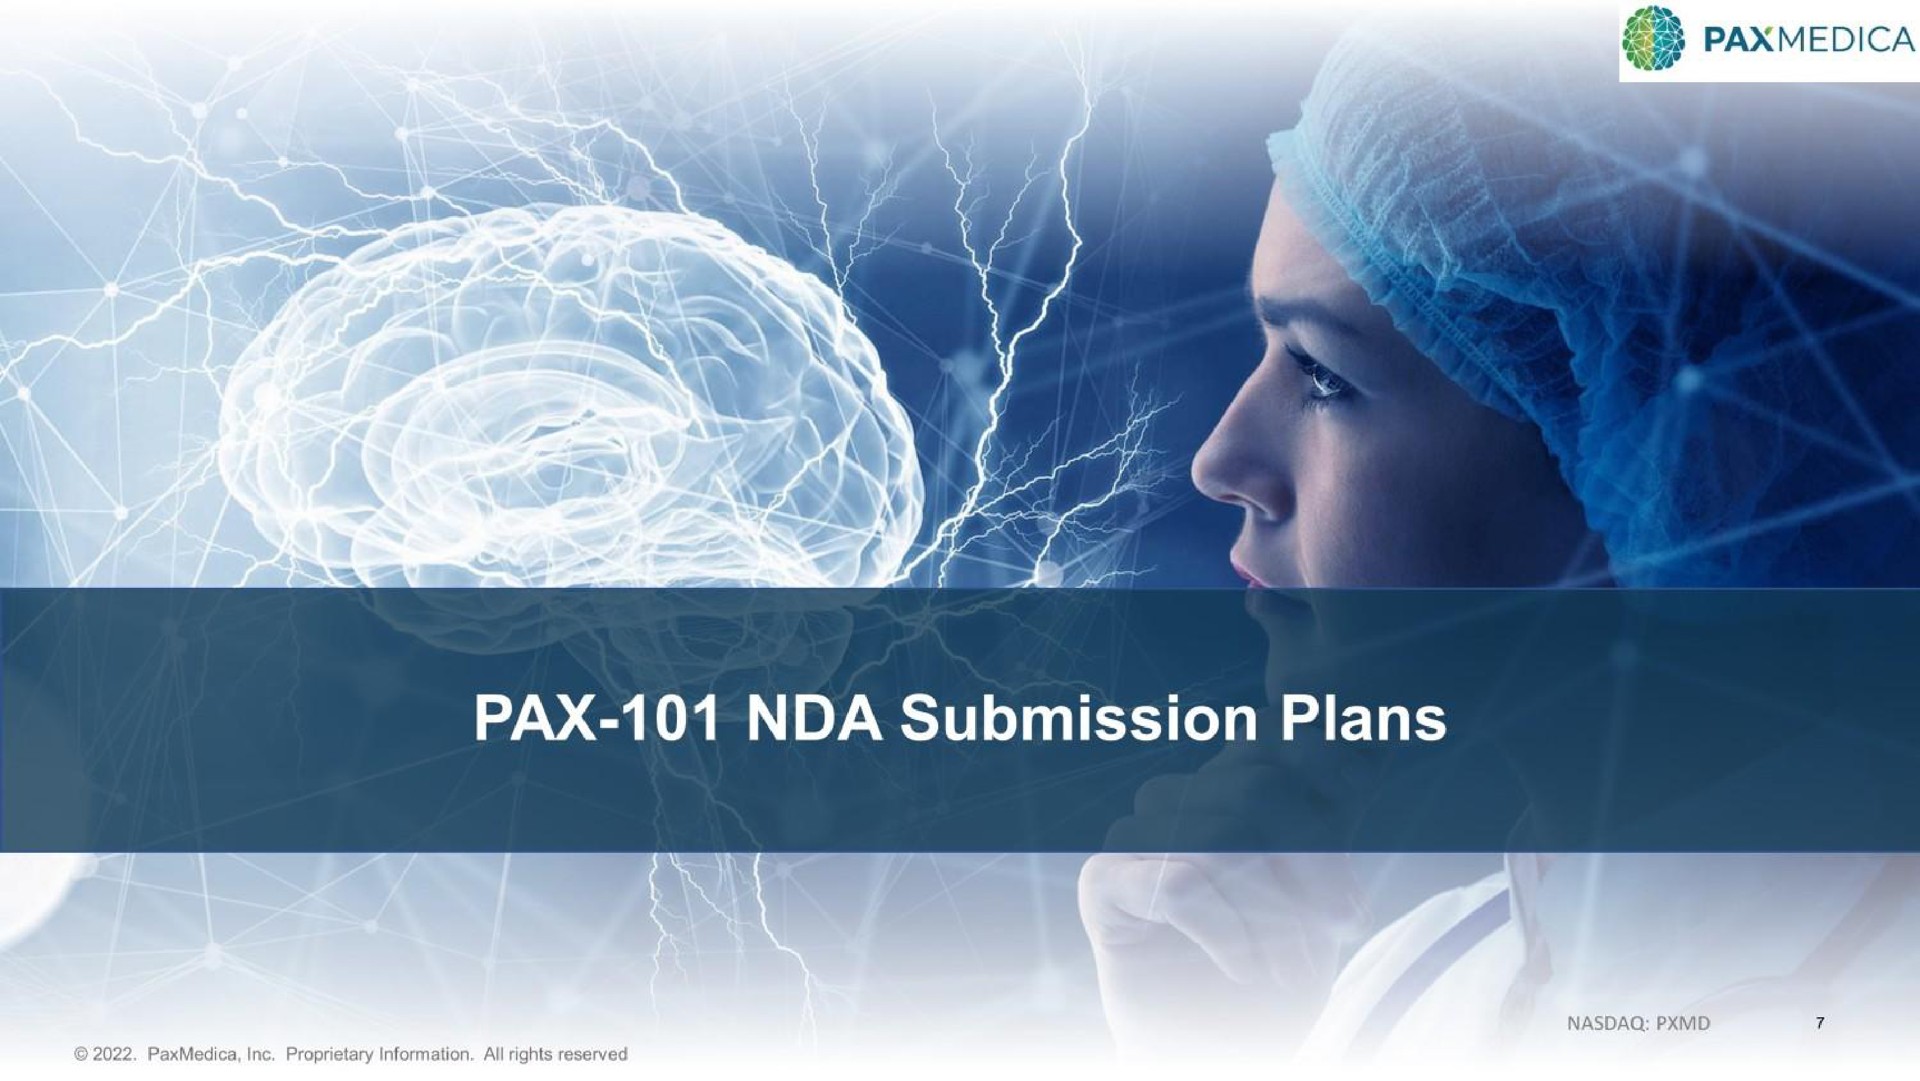 pax submission plans | PaxMedica